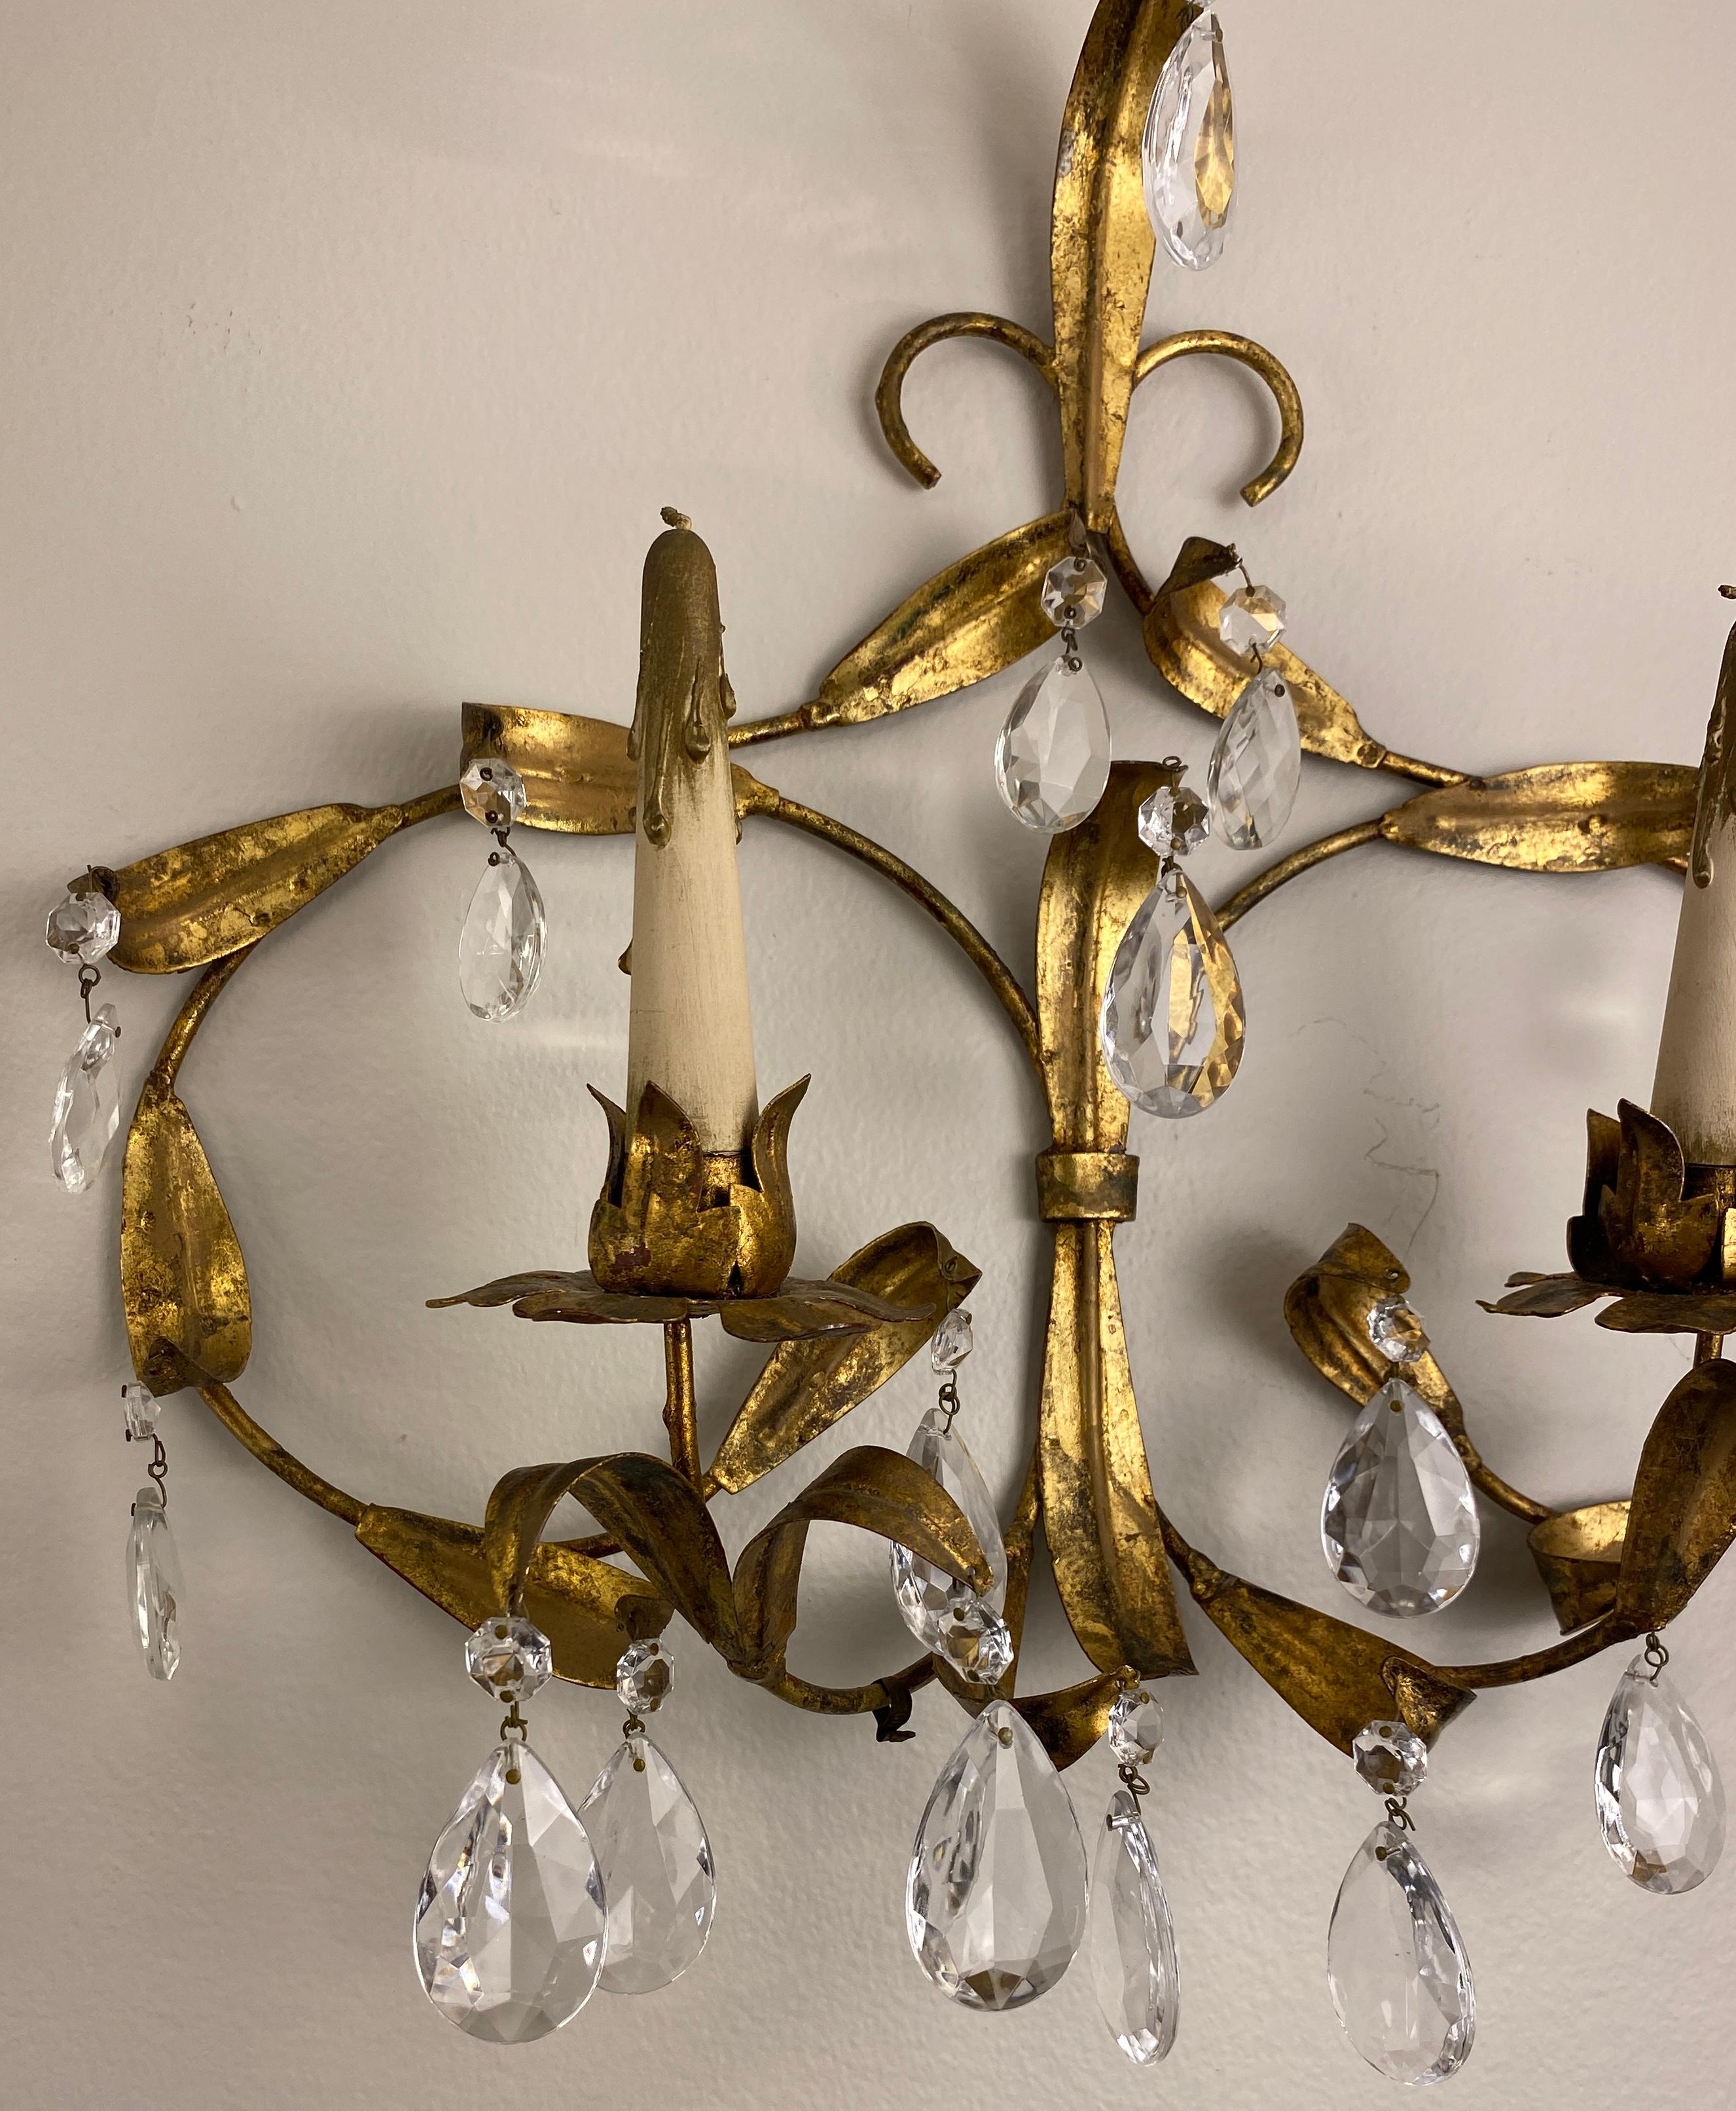 French Pair of Maison Baguès Mid-20th Century Gilt Metal and Crystal Wall Sconces For Sale